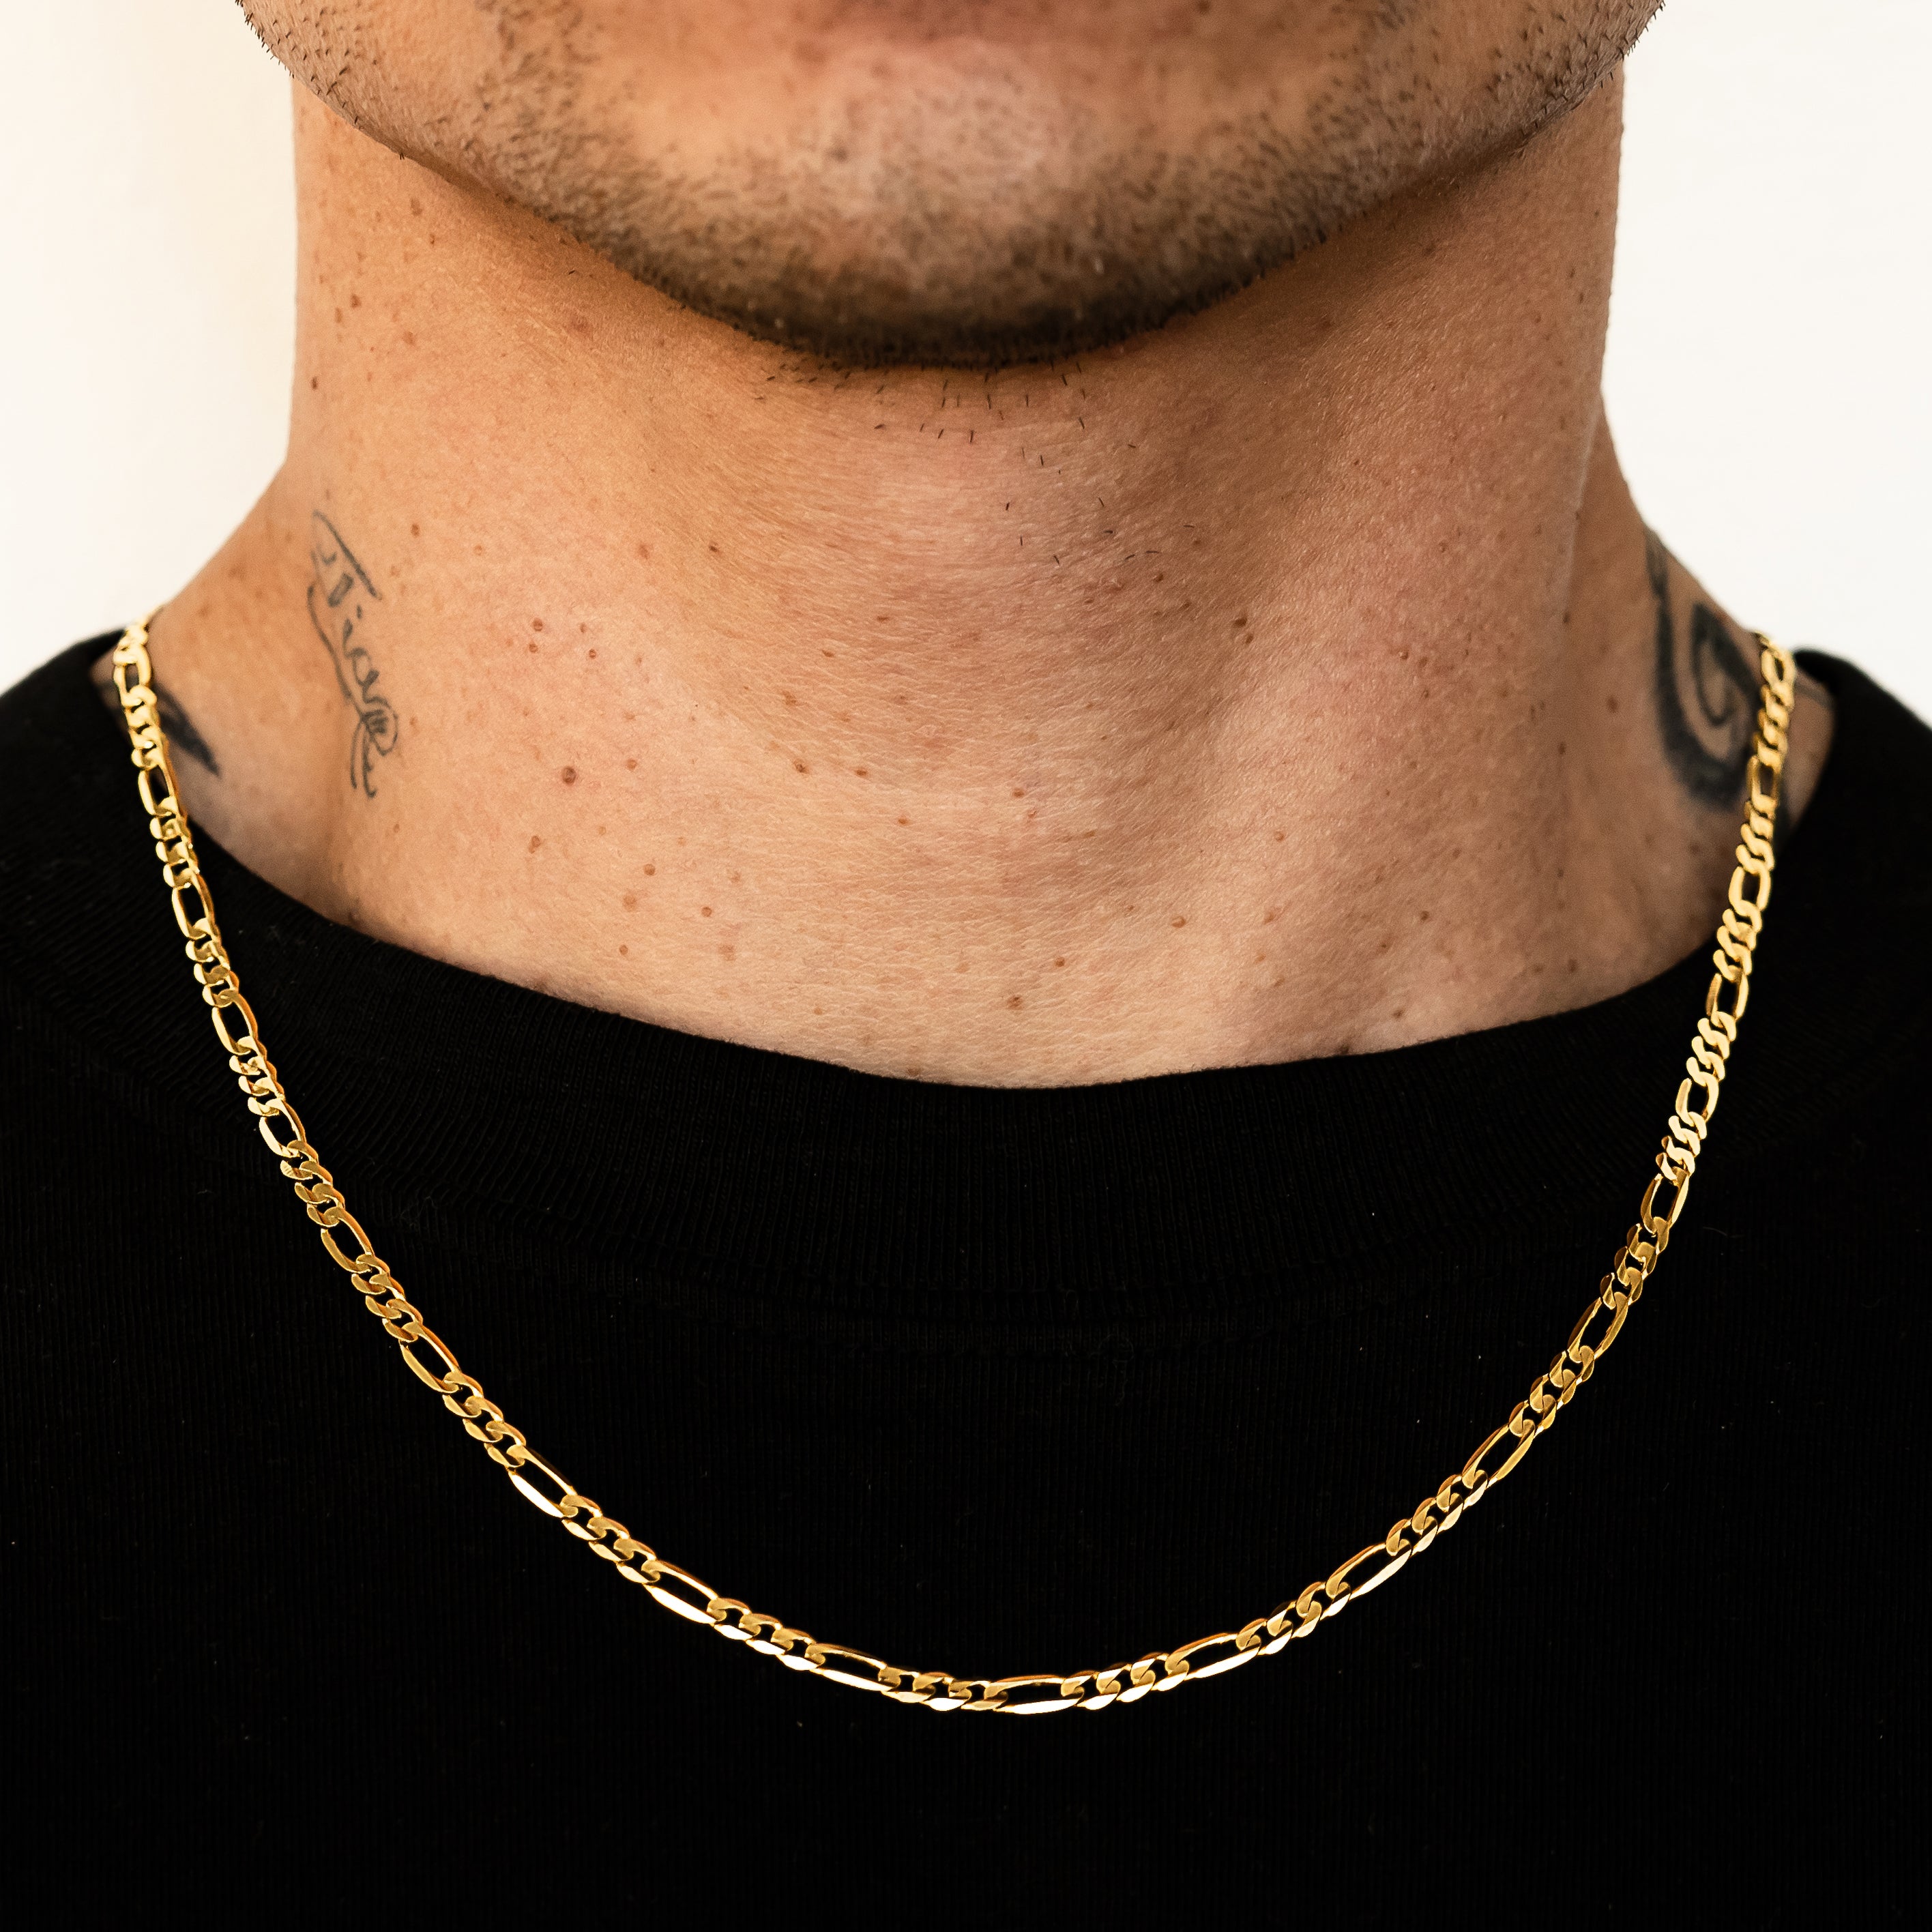 10k Yellow Gold Solid Figaro Chain